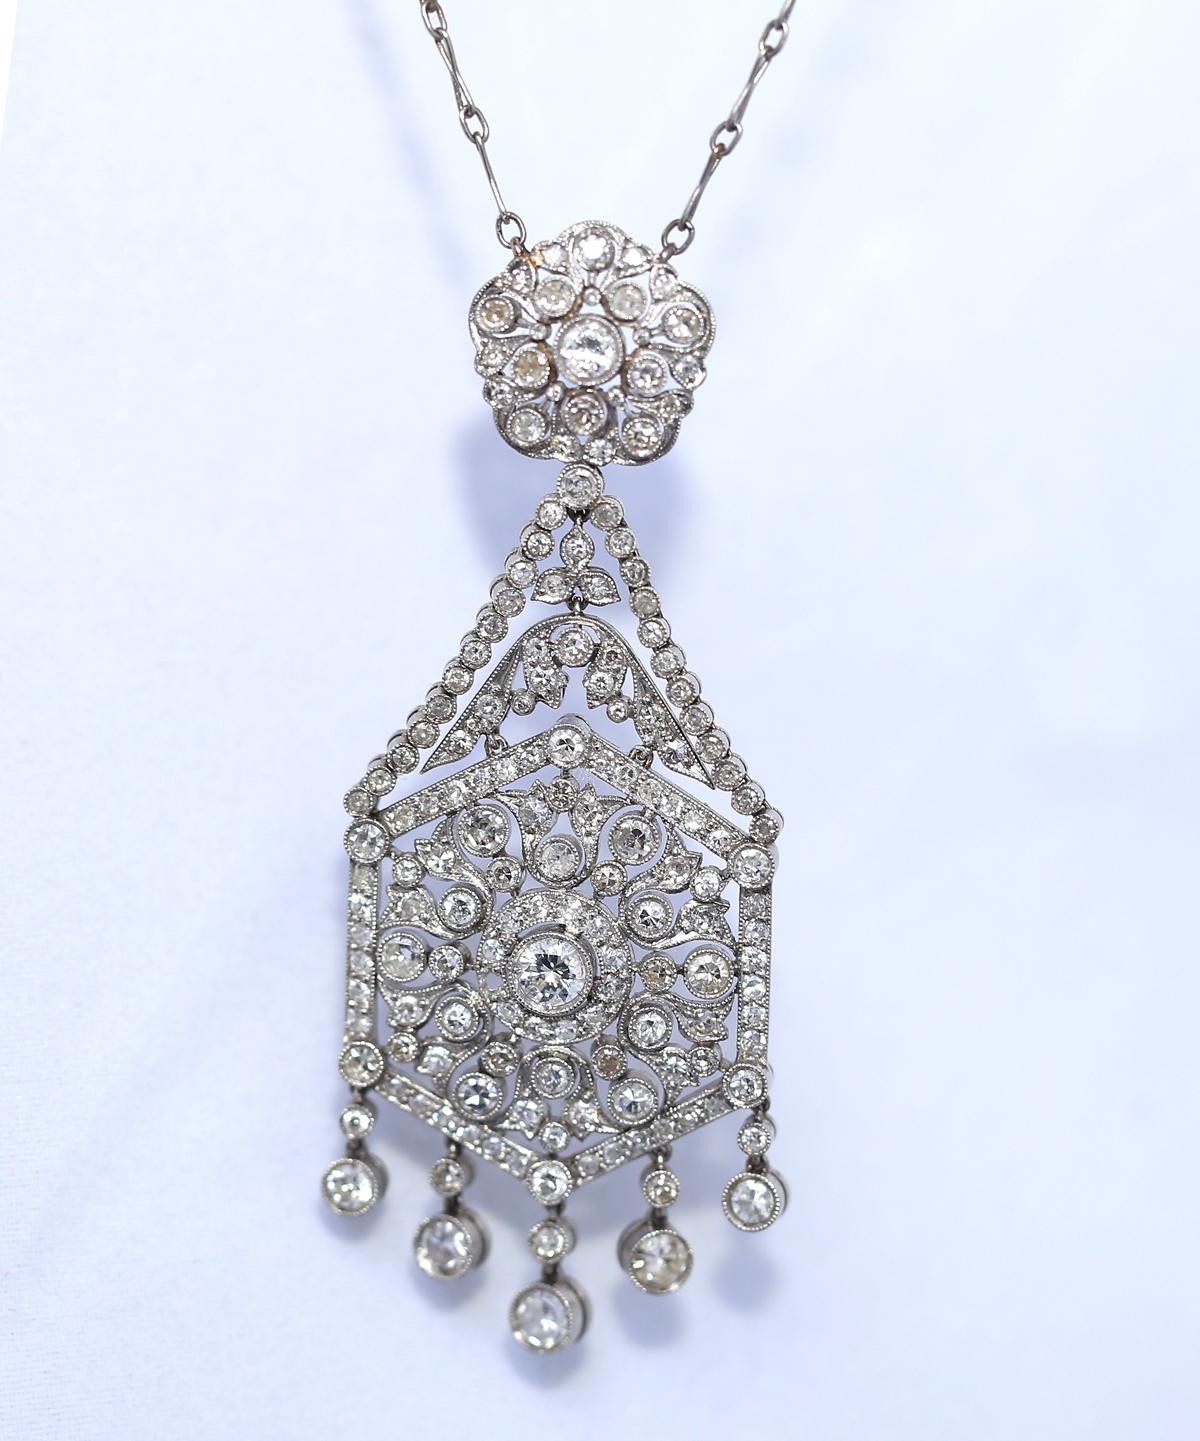 Art Deco Platinum Diamonds Pendant and a Chain. Created in 1920 es.
A truly superb quality Platinum pendant and a chain. Late Art Deco style with extensive use of Diamonds. The pendant has two parts linked together and five Diamonds each separately